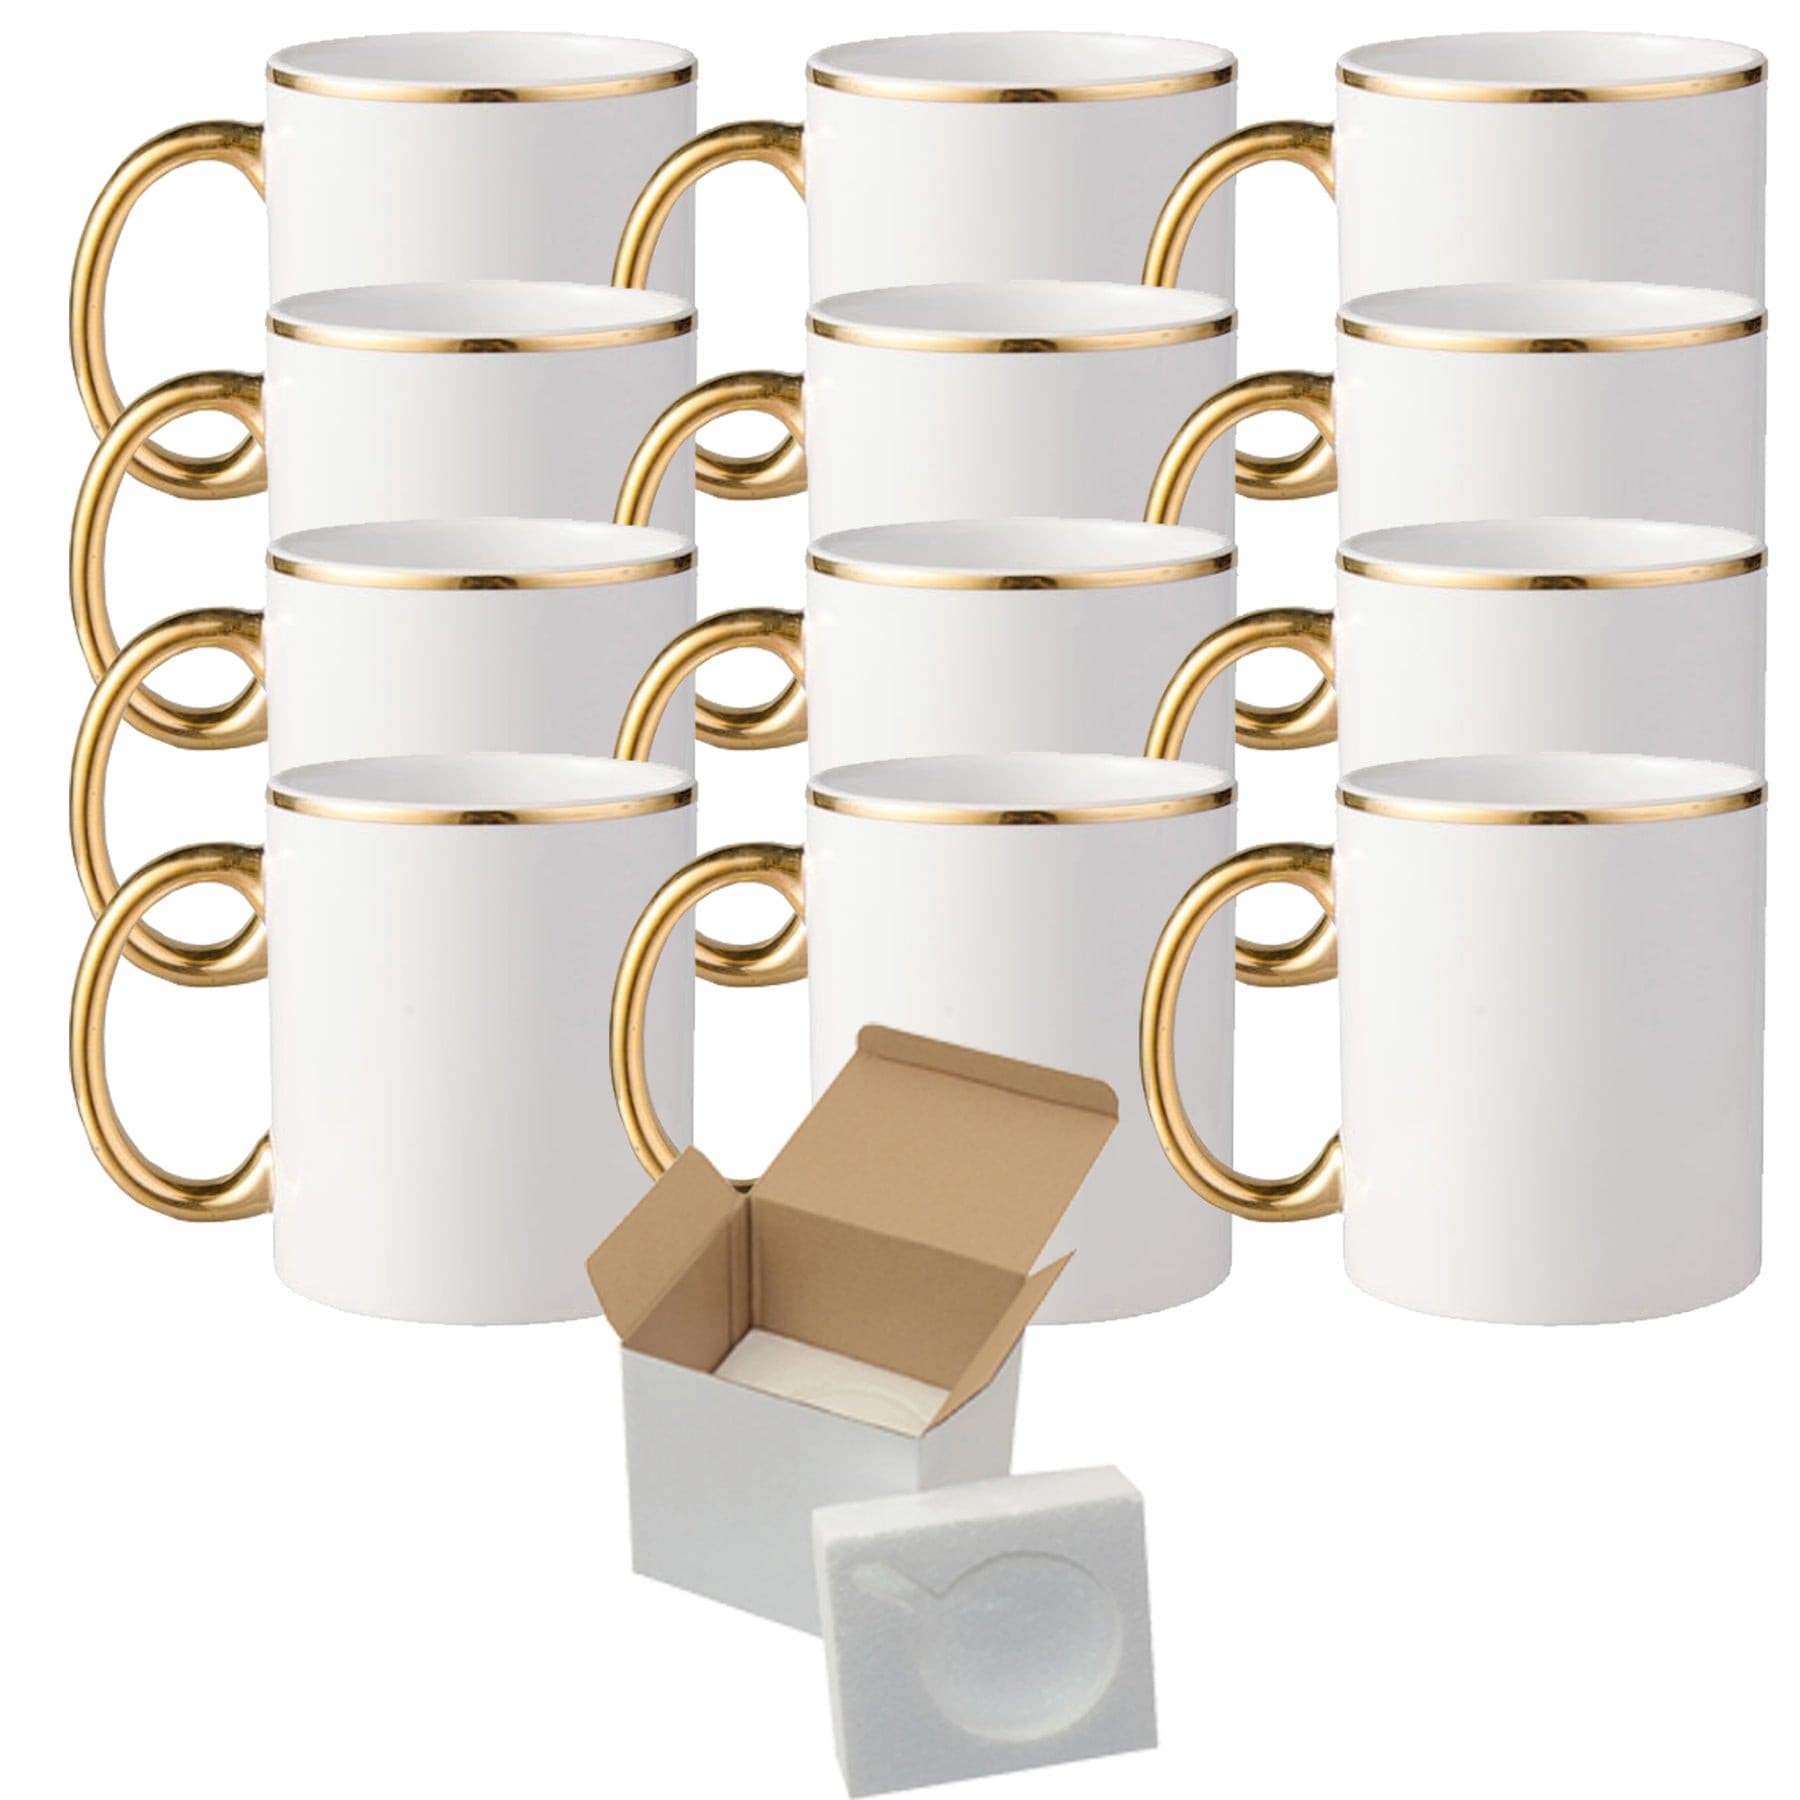 Mugsie | 12 Pcs High-Quality 15oz Sublimation Mugs Featuring Gold Rims and Handles, Including Foam Support Boxes for Safe and Convenient Storage